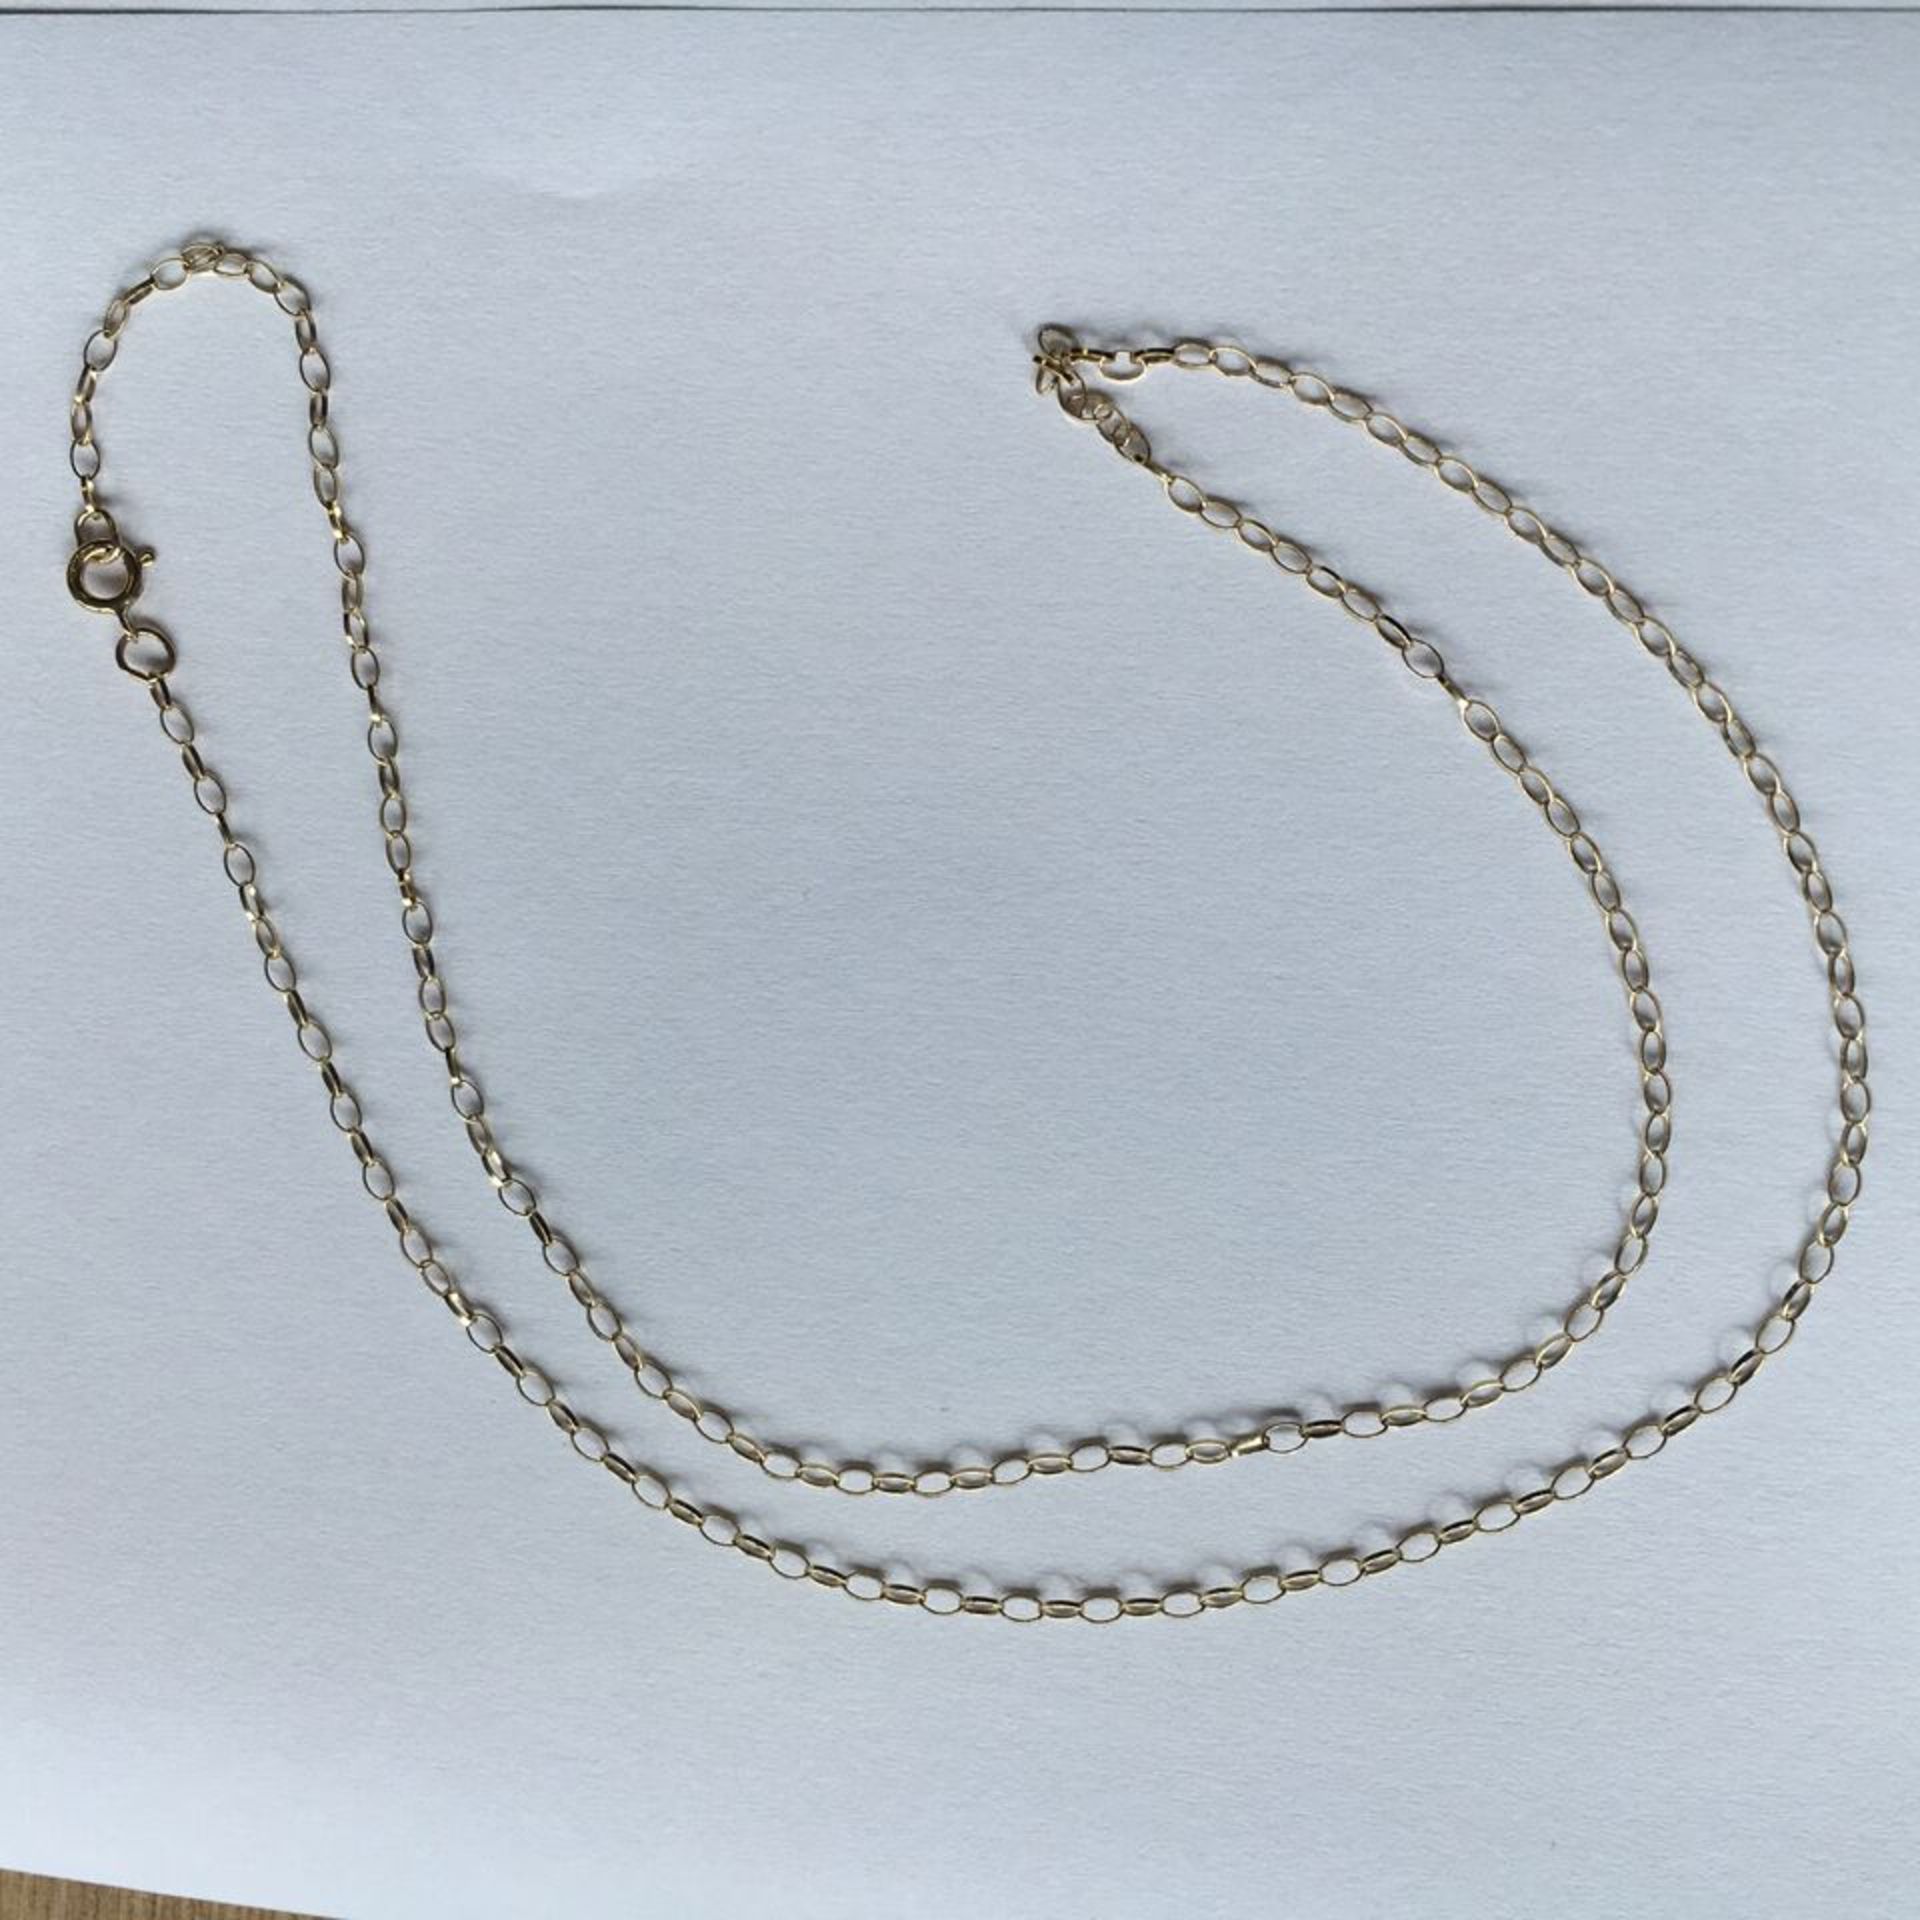 HALLMARKED 9CT YELLOW GOLD BELCHER CHAIN NECKLACE. 16". FREE UK DELIVERY. NO VAT.